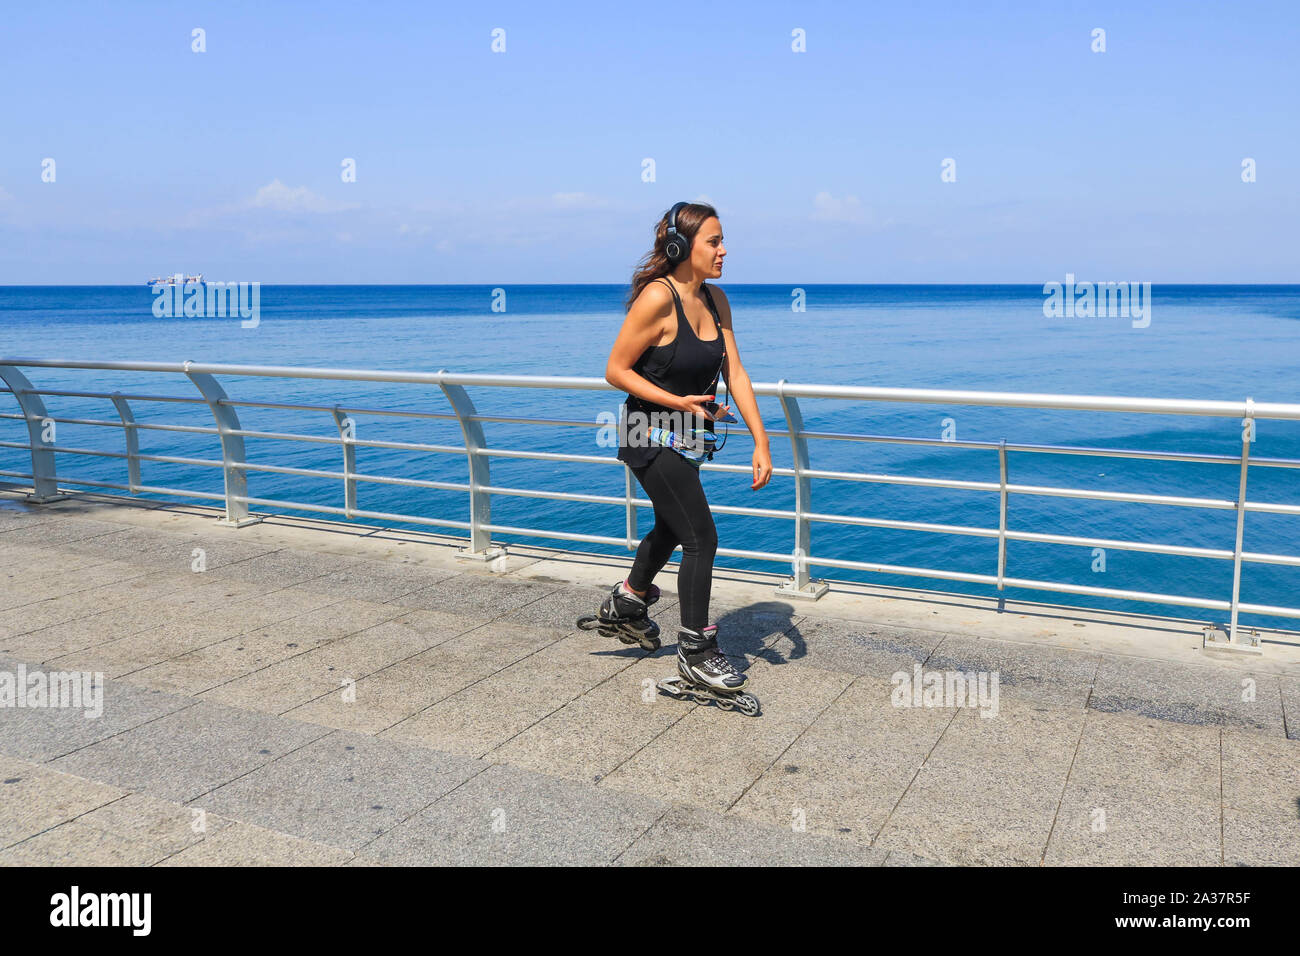 October 6, 2019, Beirut, Lebanon: A woman roller skates during the hot and humid day in Beirut. (Credit Image: © Amer Ghazzal/SOPA Images via ZUMA Wire) Stock Photo